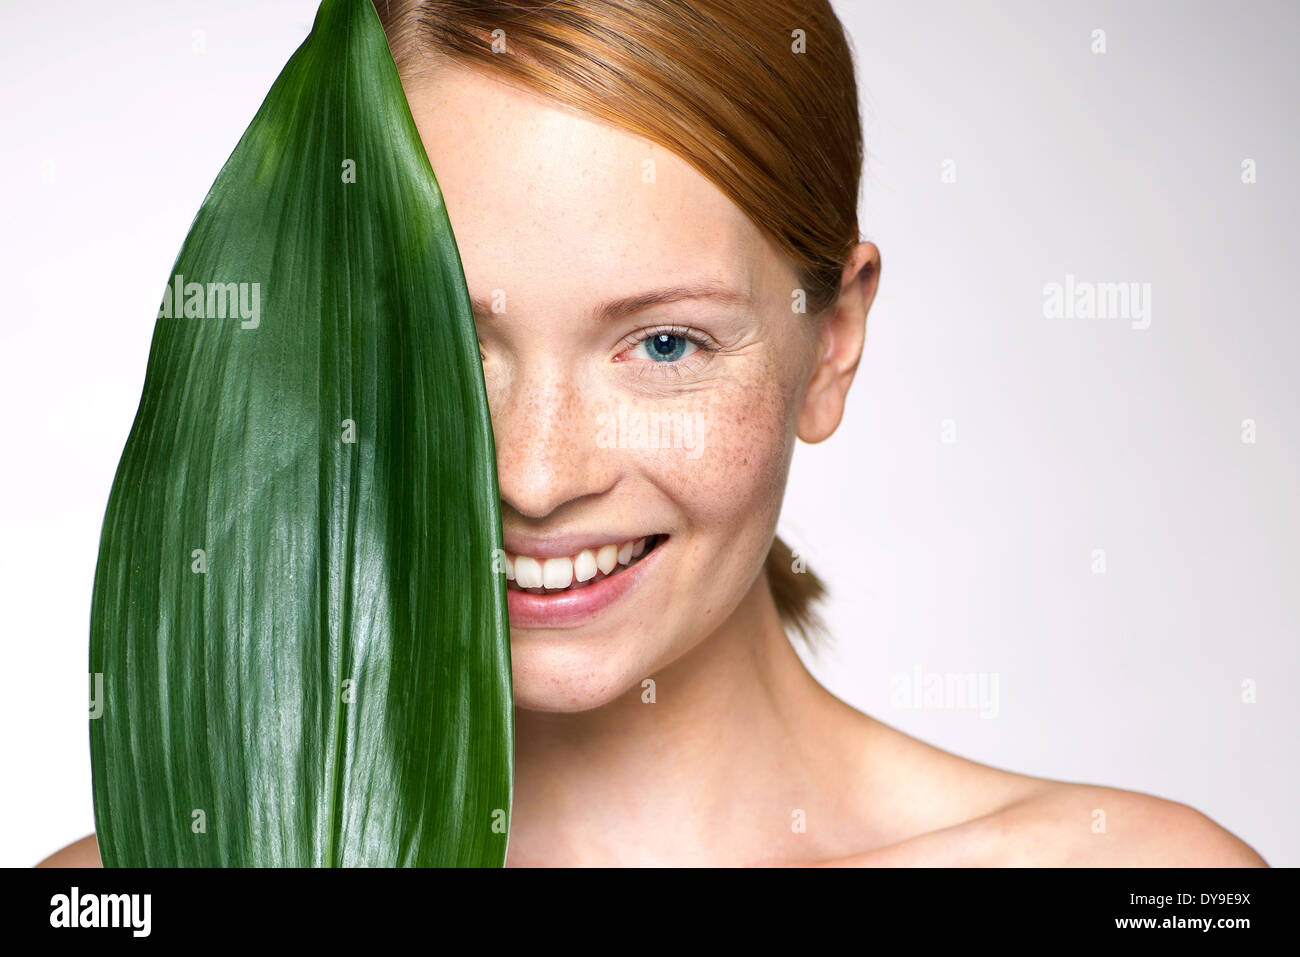 Young woman holding up leaf concealing part of face Stock Photo